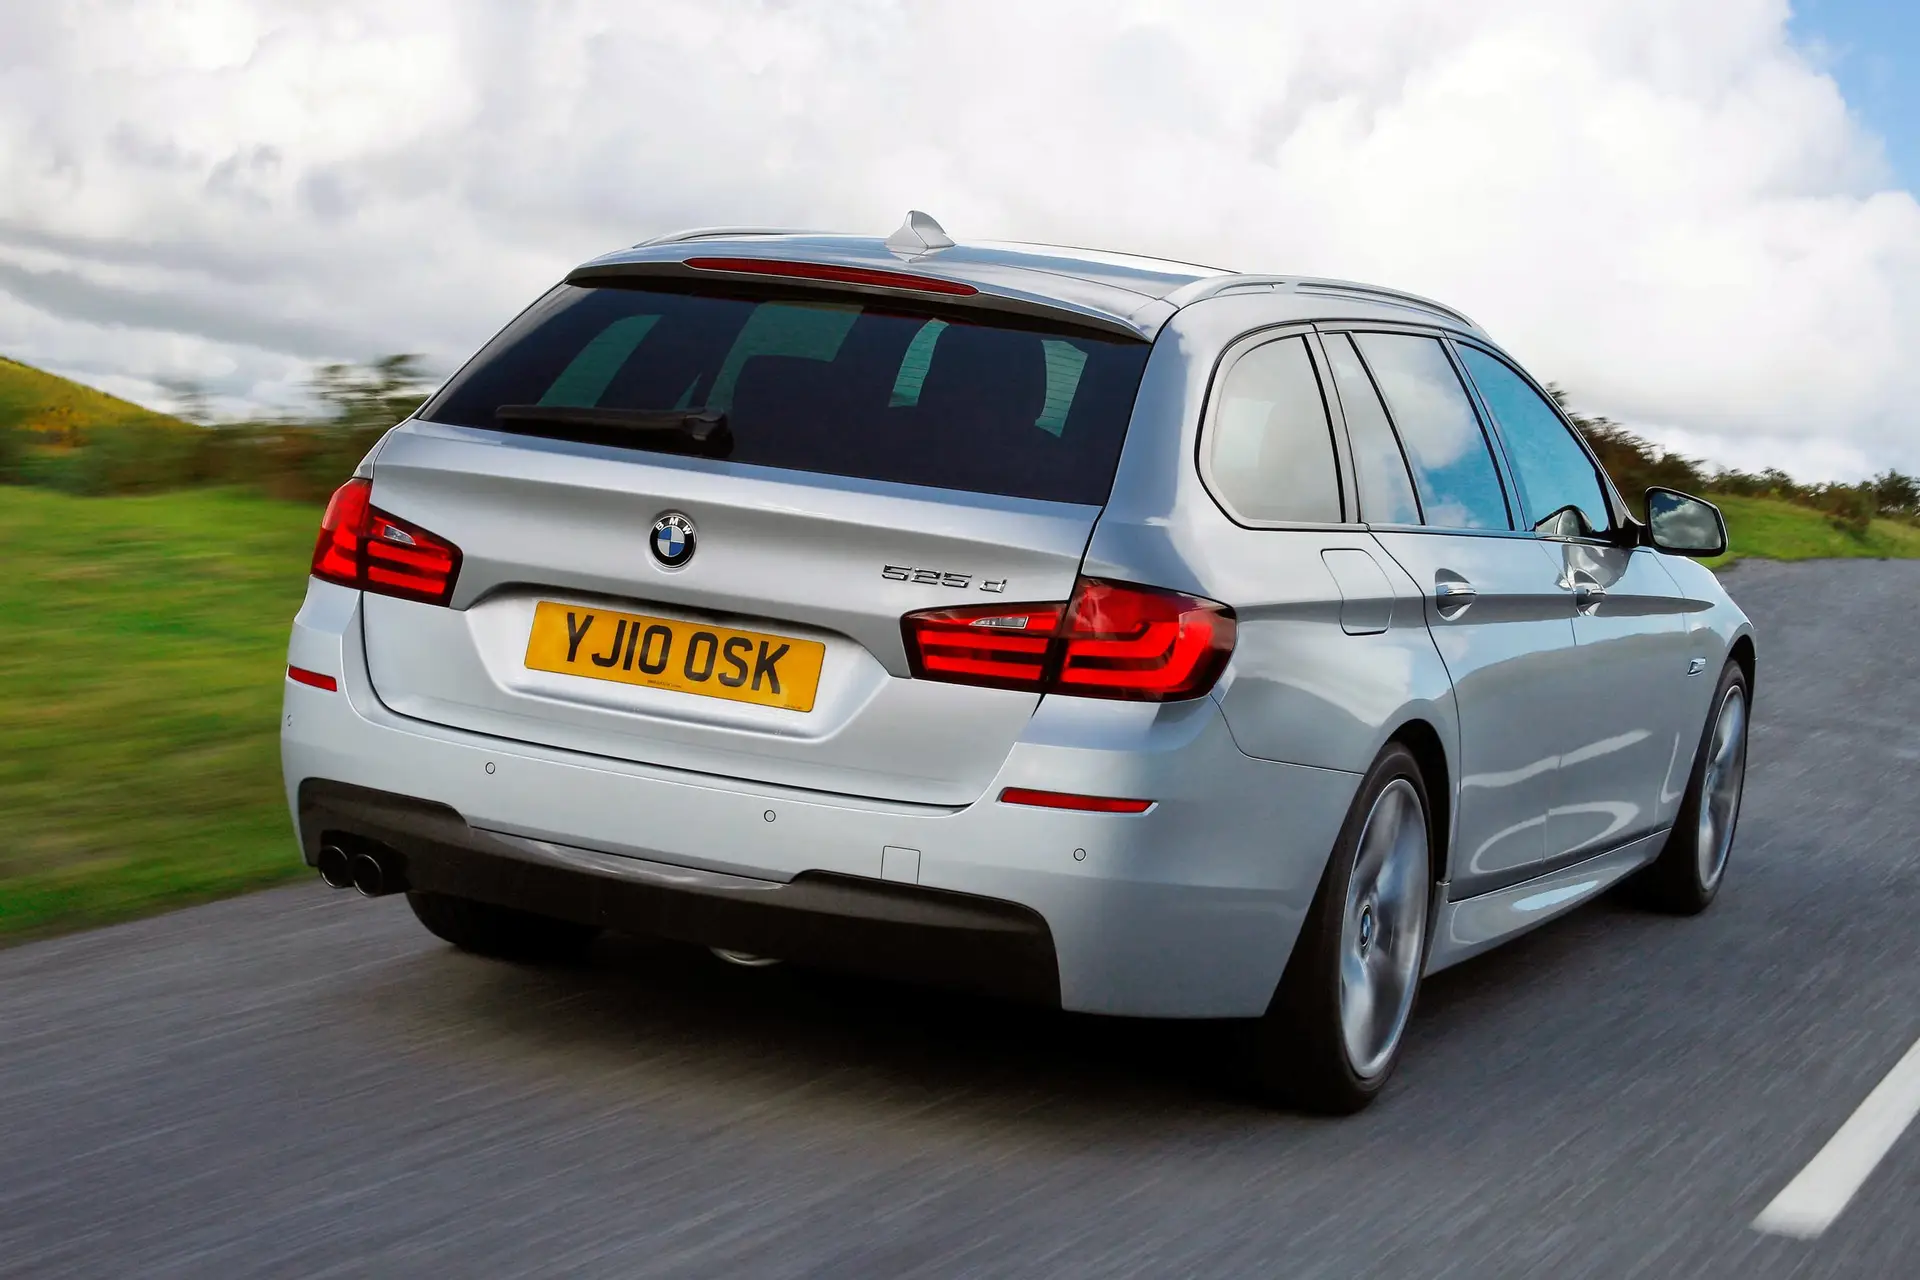 BMW 5 Series Touring (2010-2017) Review: Exterior rear three quarter photo of the BMW 5 Series Touring on the road